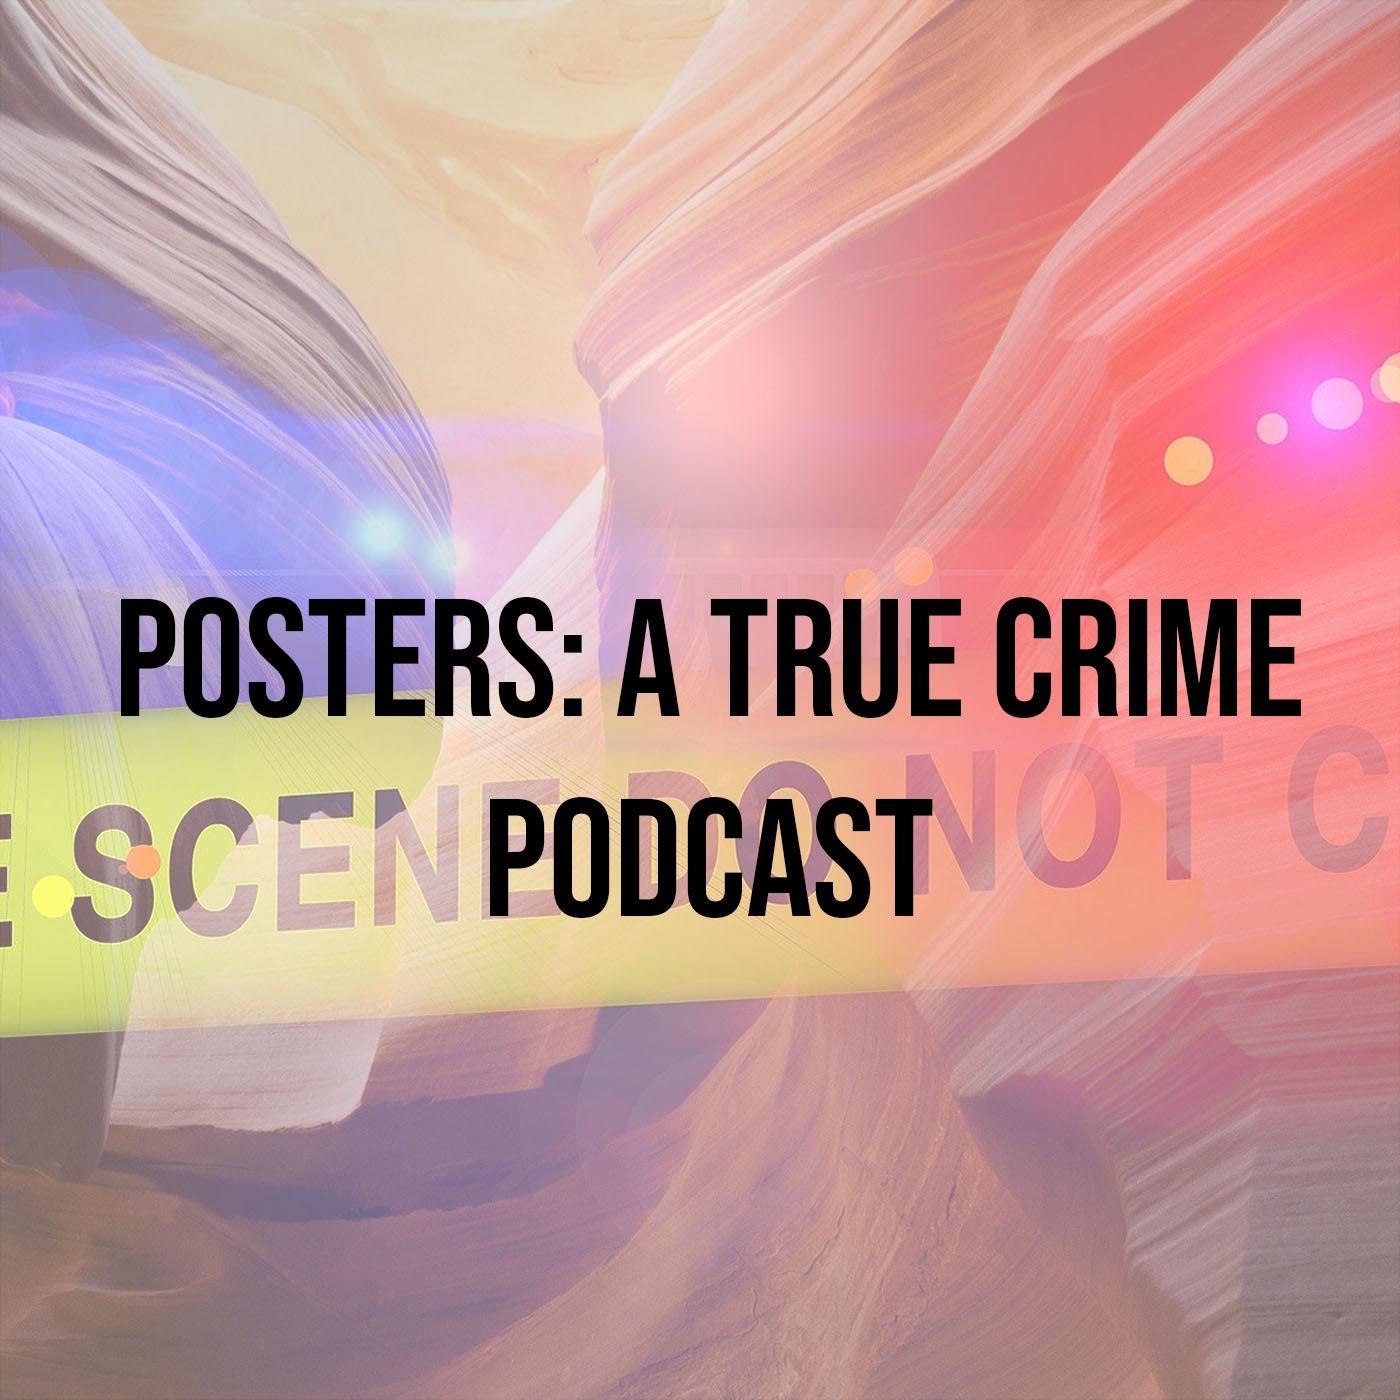 Posters: A True Crime Podcast